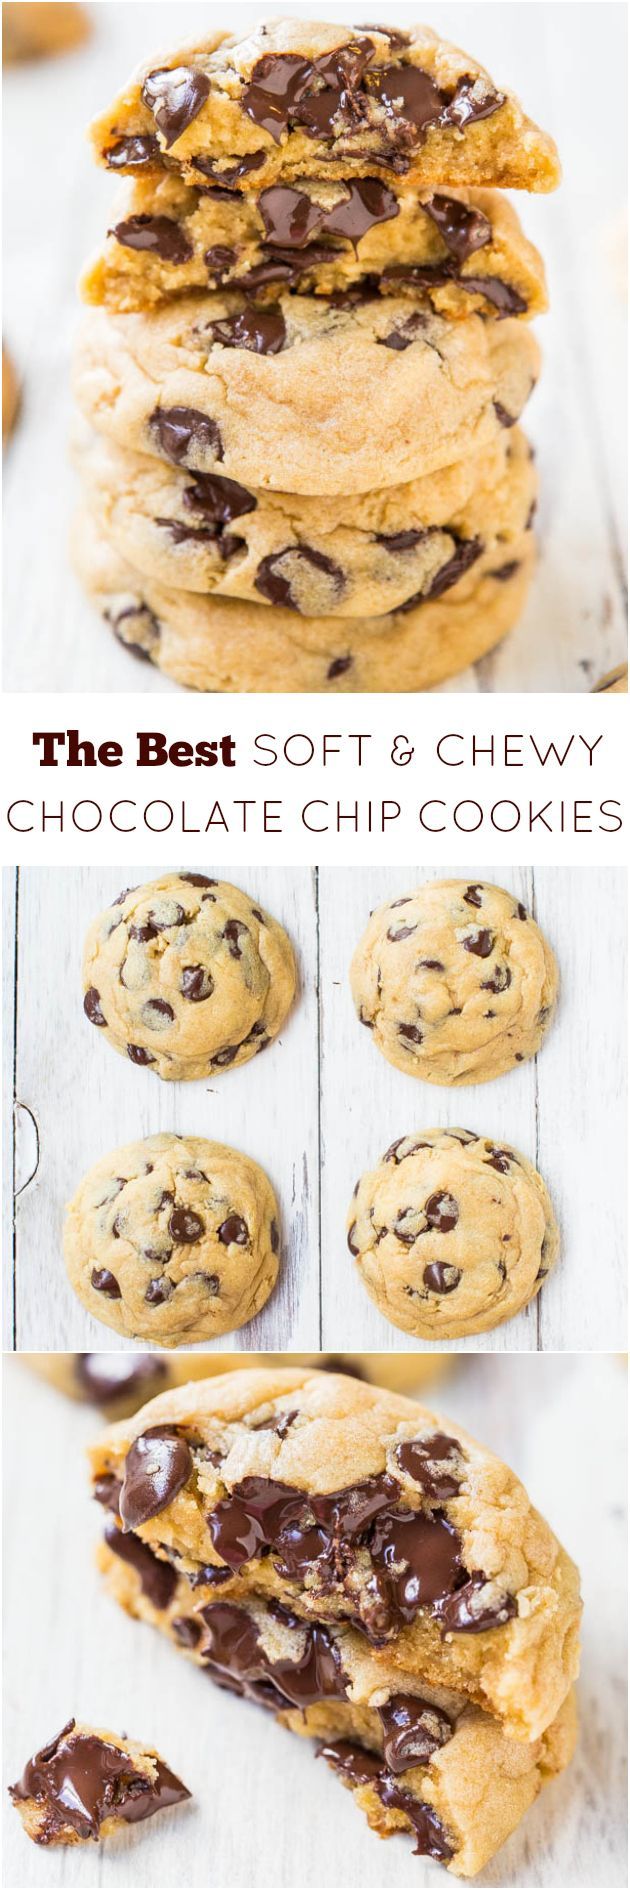 The Best Soft and Chewy Chocolate Chip Cookies – My favorite recipe for chocolate chip cookies! Just one b